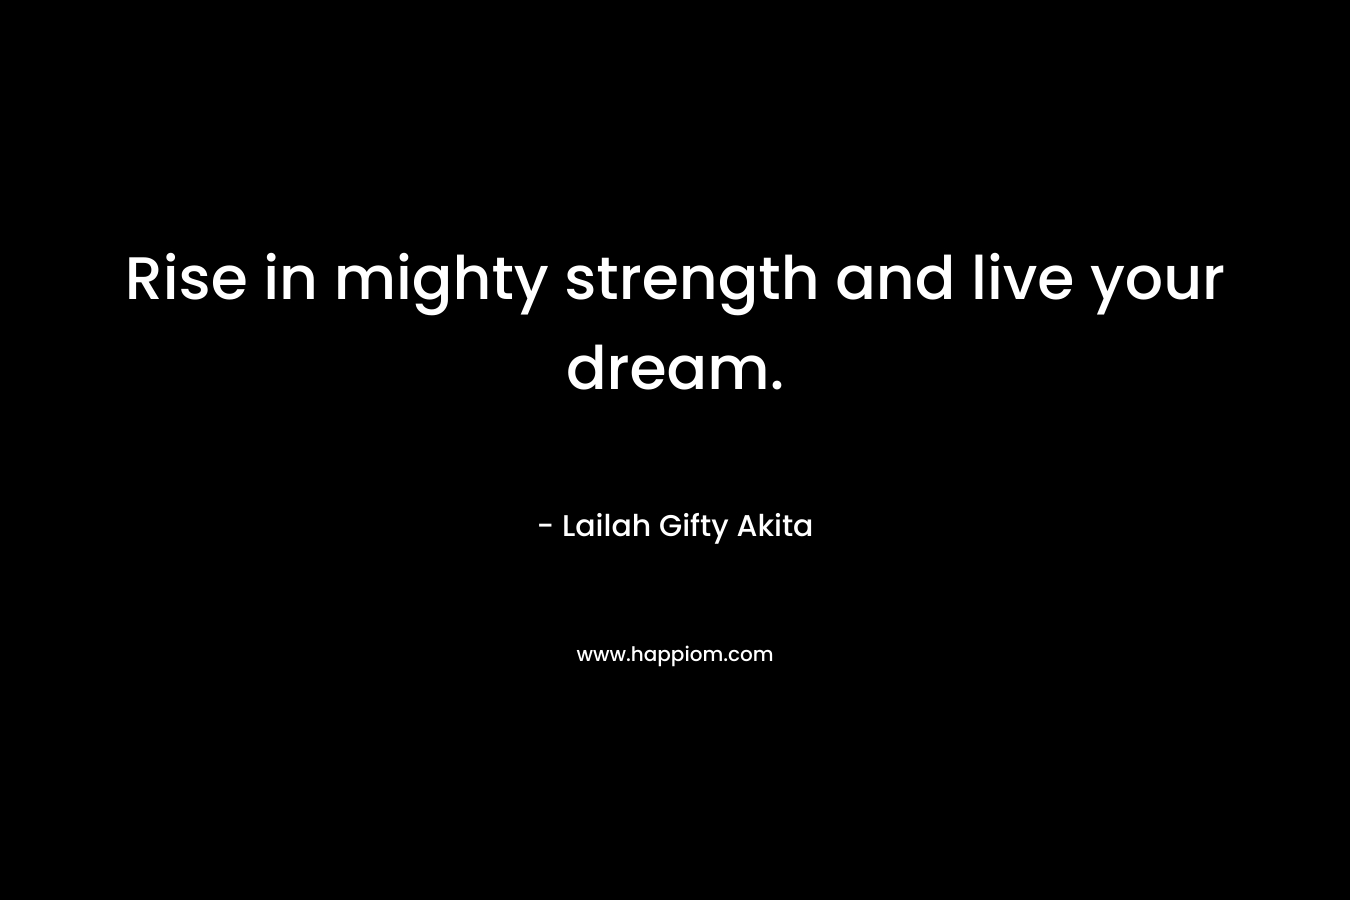 Rise in mighty strength and live your dream.